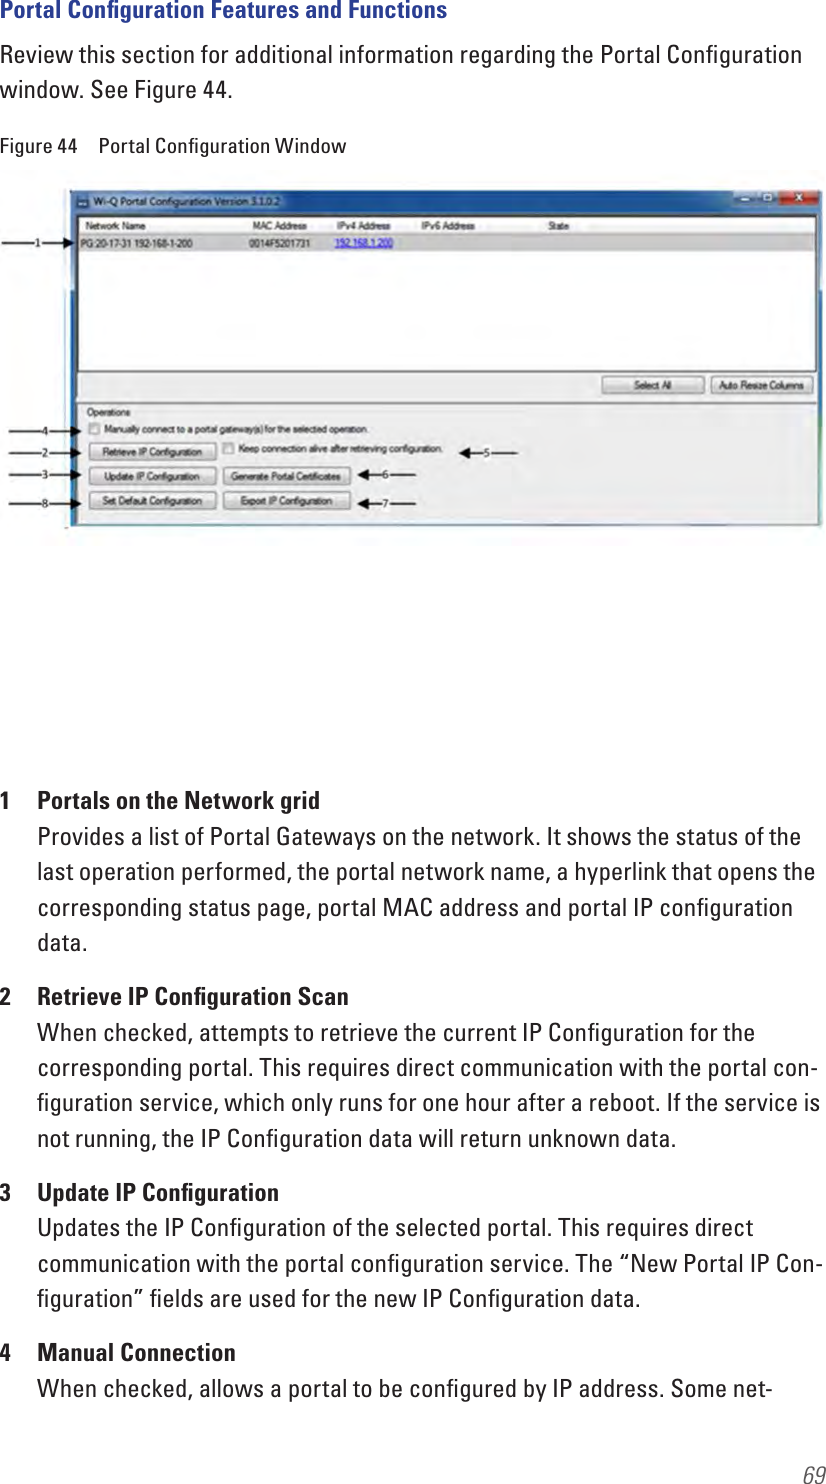 69Portal Conﬁguration Features and FunctionsReview this section for additional information regarding the Portal Conﬁguration window. See Figure 44.Figure 44  Portal Conﬁguration Window1  Portals on the Network grid Provides a list of Portal Gateways on the network. It shows the status of the last operation performed, the portal network name, a hyperlink that opens the corresponding status page, portal MAC address and portal IP conﬁguration data.2  Retrieve IP Conﬁguration Scan When checked, attempts to retrieve the current IP Conﬁguration for the corresponding portal. This requires direct communication with the portal con-ﬁguration service, which only runs for one hour after a reboot. If the service is not running, the IP Conﬁguration data will return unknown data.3  Update IP Conﬁguration Updates the IP Conﬁguration of the selected portal. This requires direct communication with the portal conﬁguration service. The “New Portal IP Con-ﬁguration” ﬁelds are used for the new IP Conﬁguration data.4  Manual Connection When checked, allows a portal to be conﬁgured by IP address. Some net-